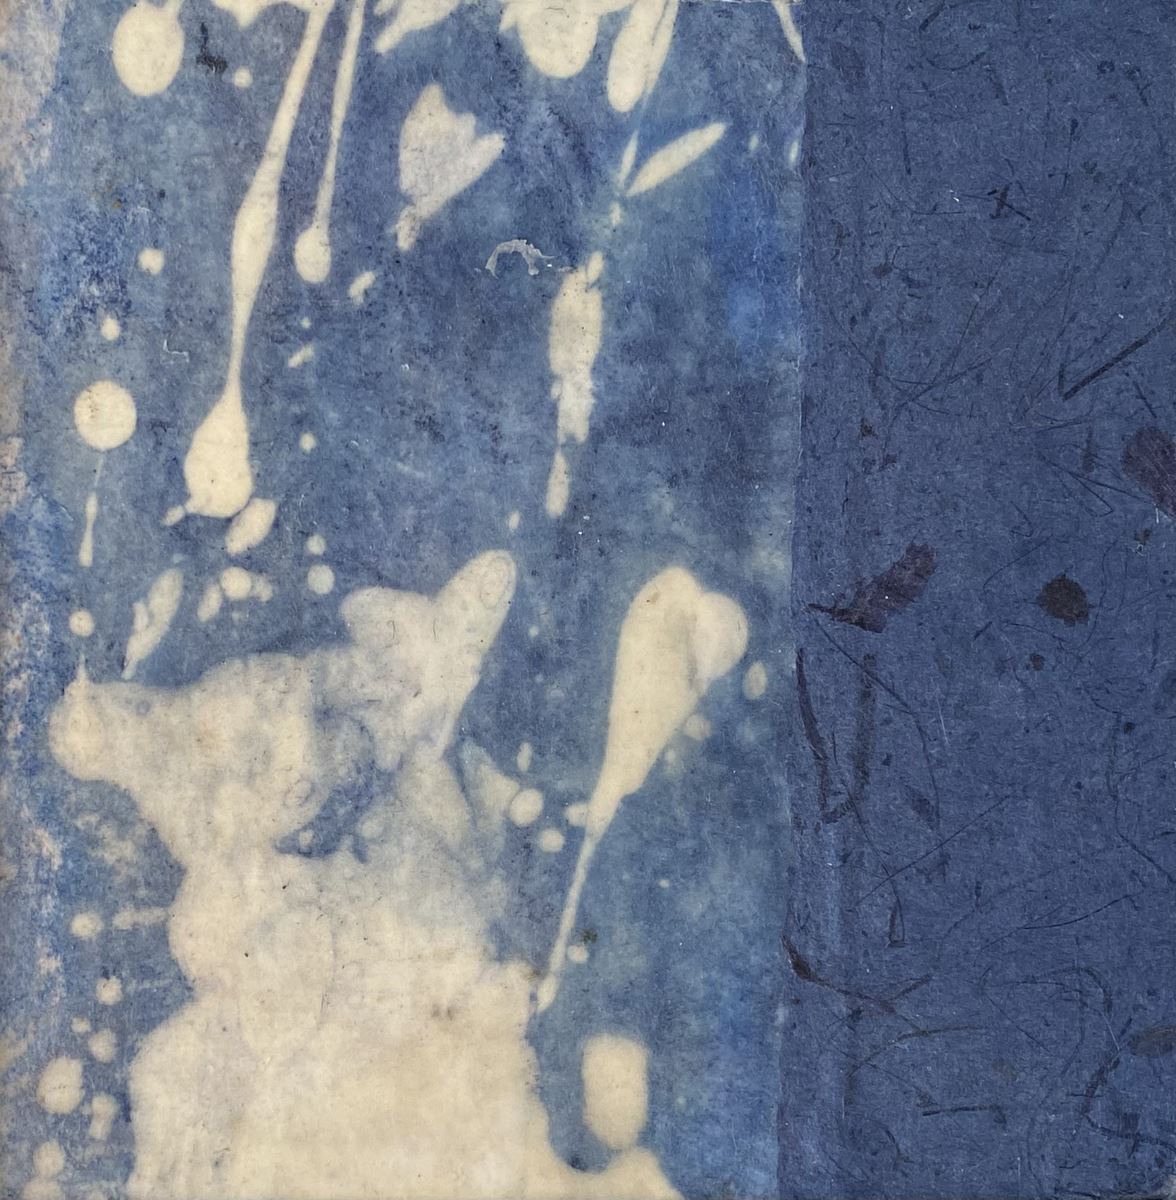 Lily of the Valley, Cyanotype Art, 4x6 Watercolor Paper